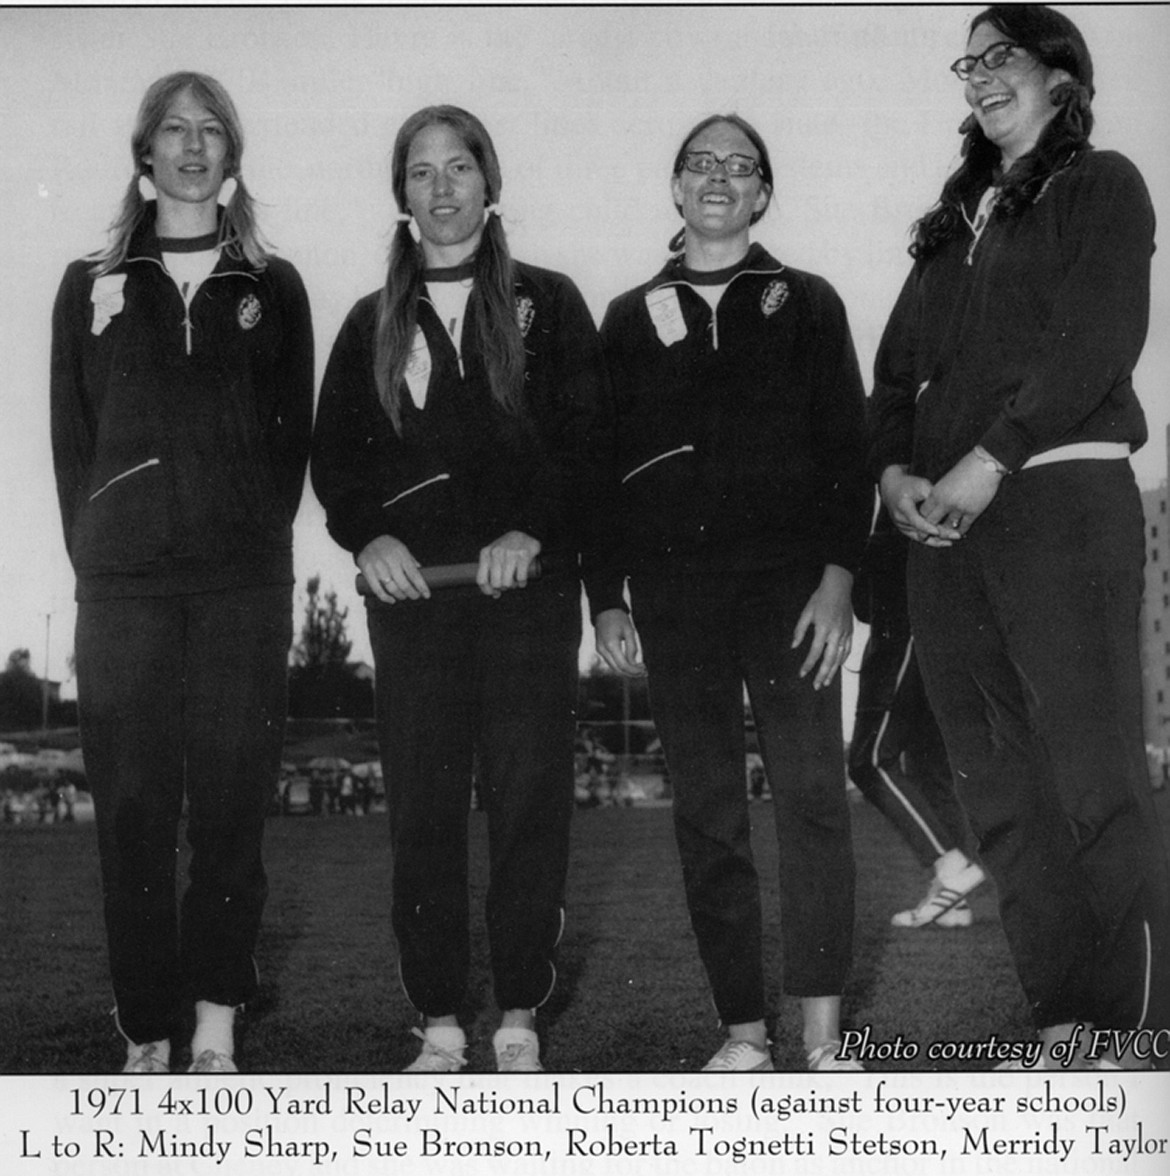 THE 1971 4x100-yard national champion relay team (from left): Mindy Sharp, Susan Bronson, Roberta Tognetti Stetson and Merridy Taylor. (Photo courtesy of Neil Eliason via Flathead Valley Community College)